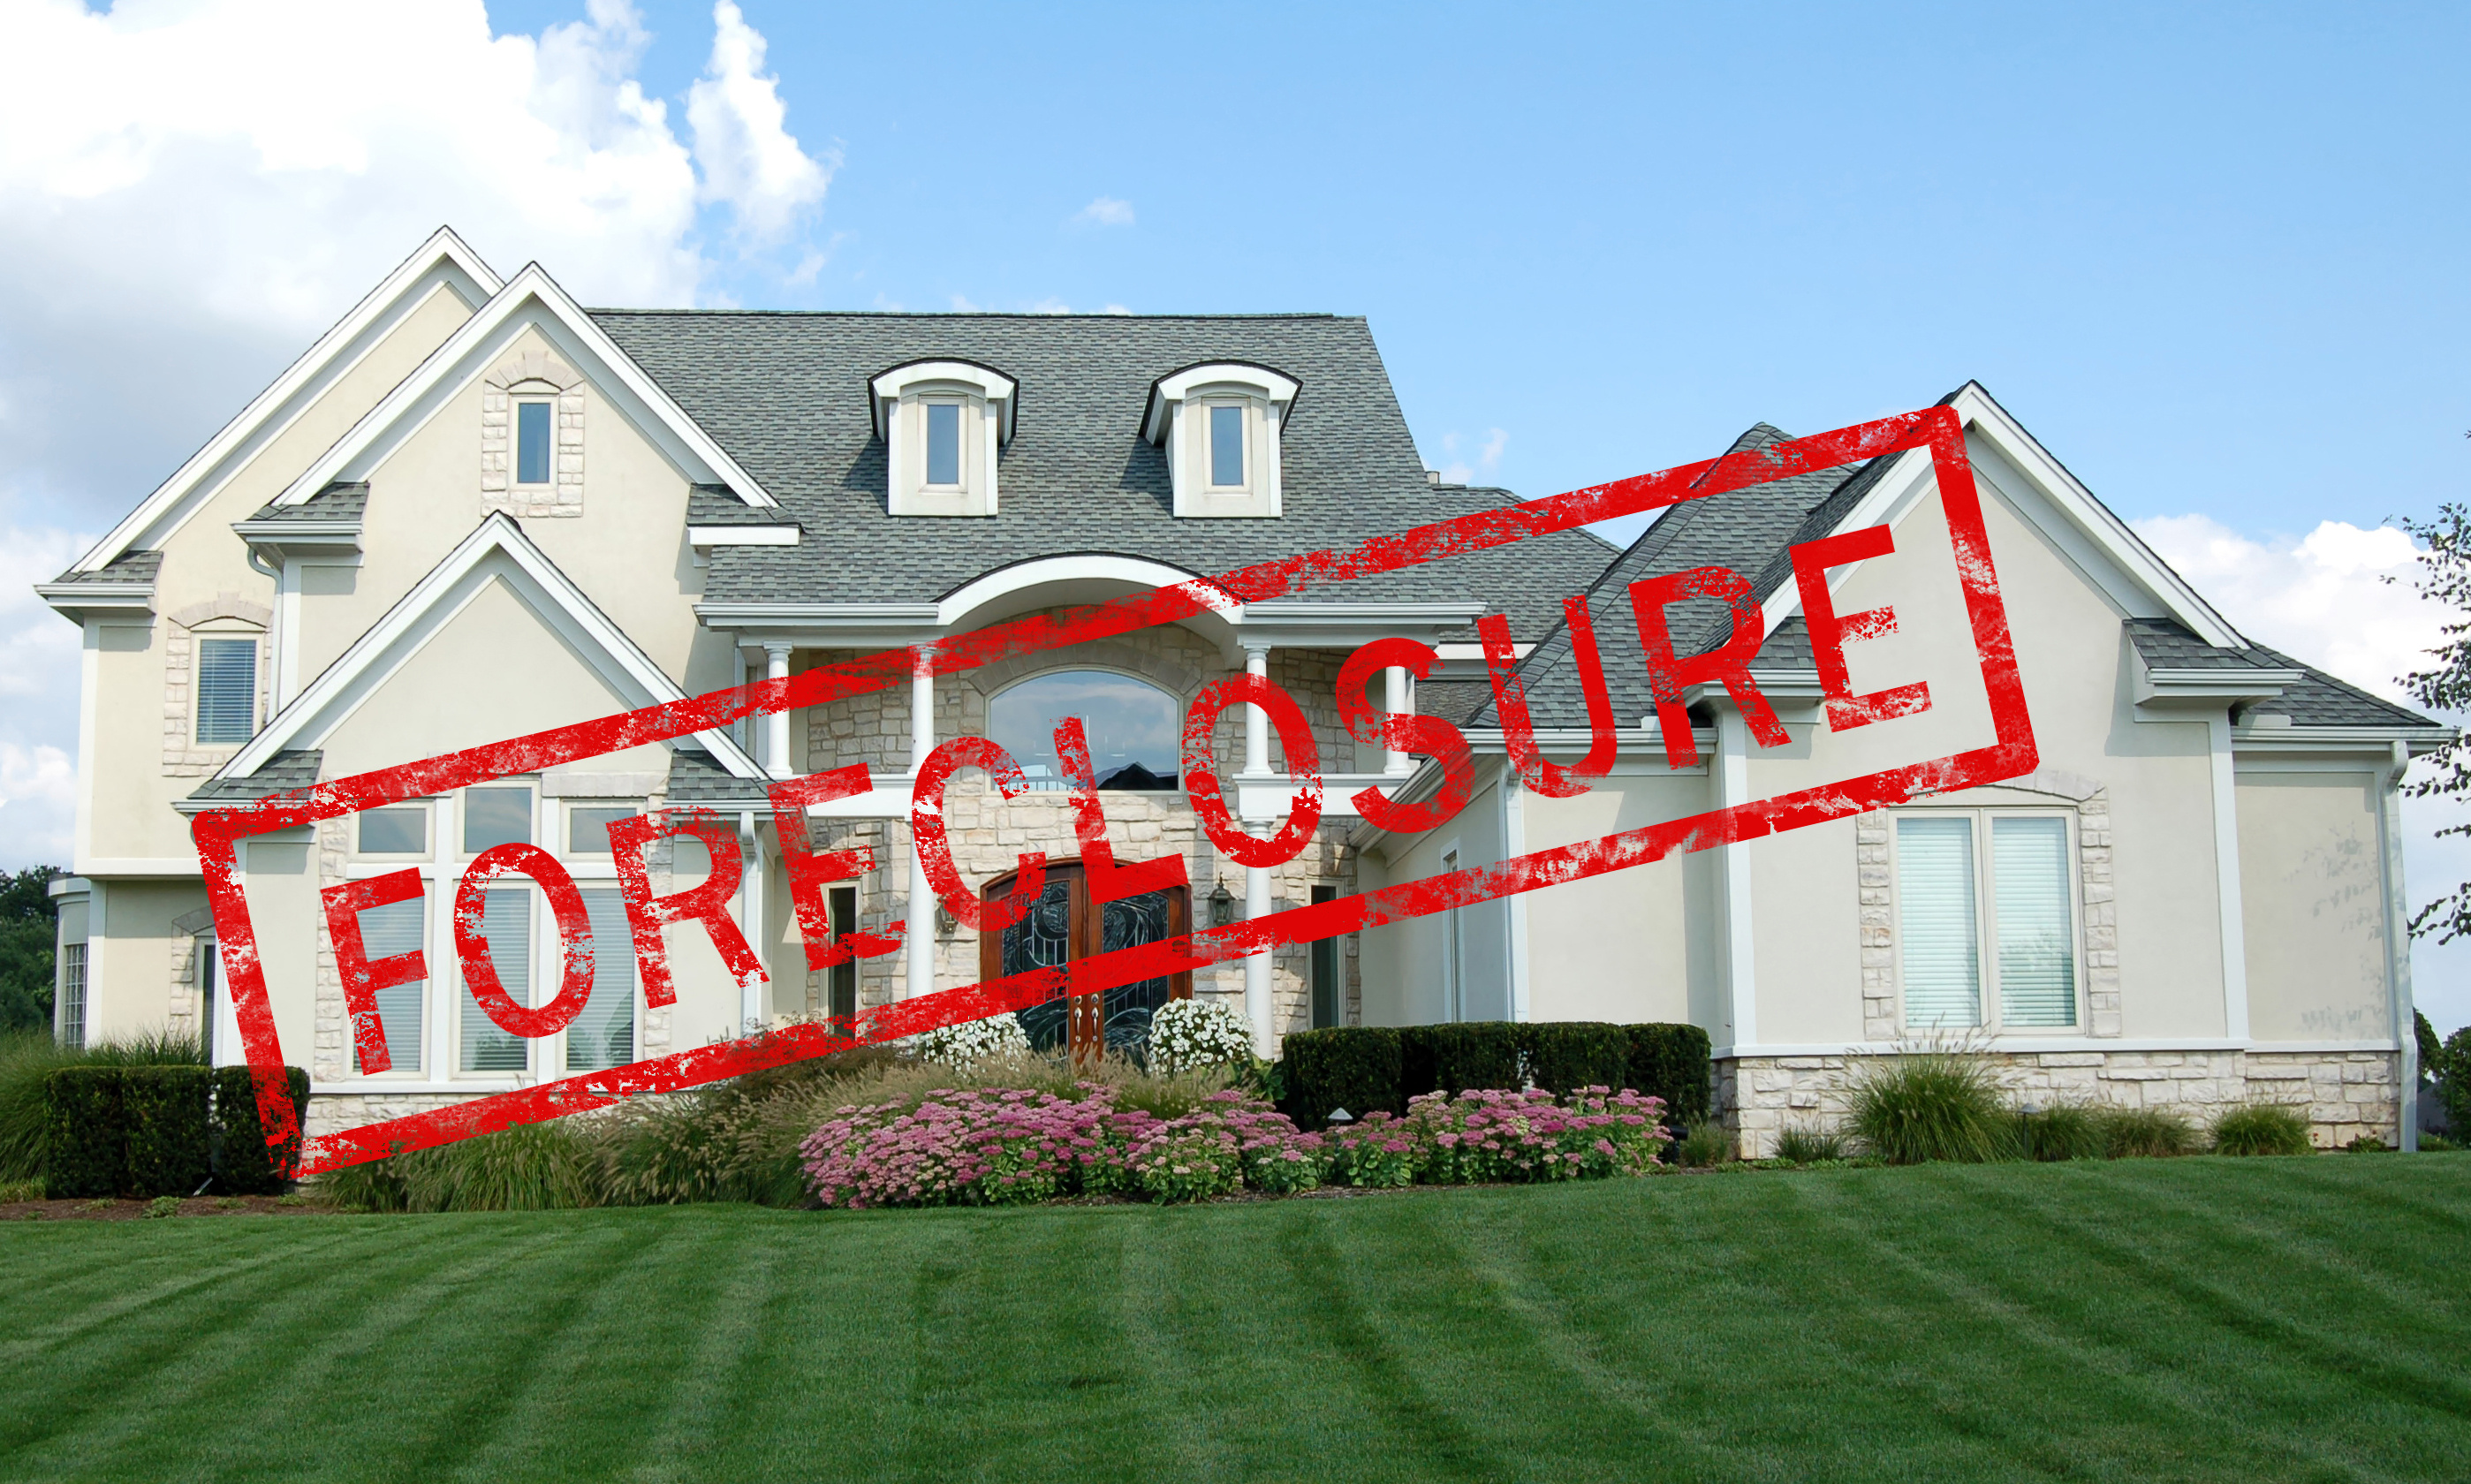 Call All State Appraisal Partners, Inc. when you need appraisals for Iredell foreclosures